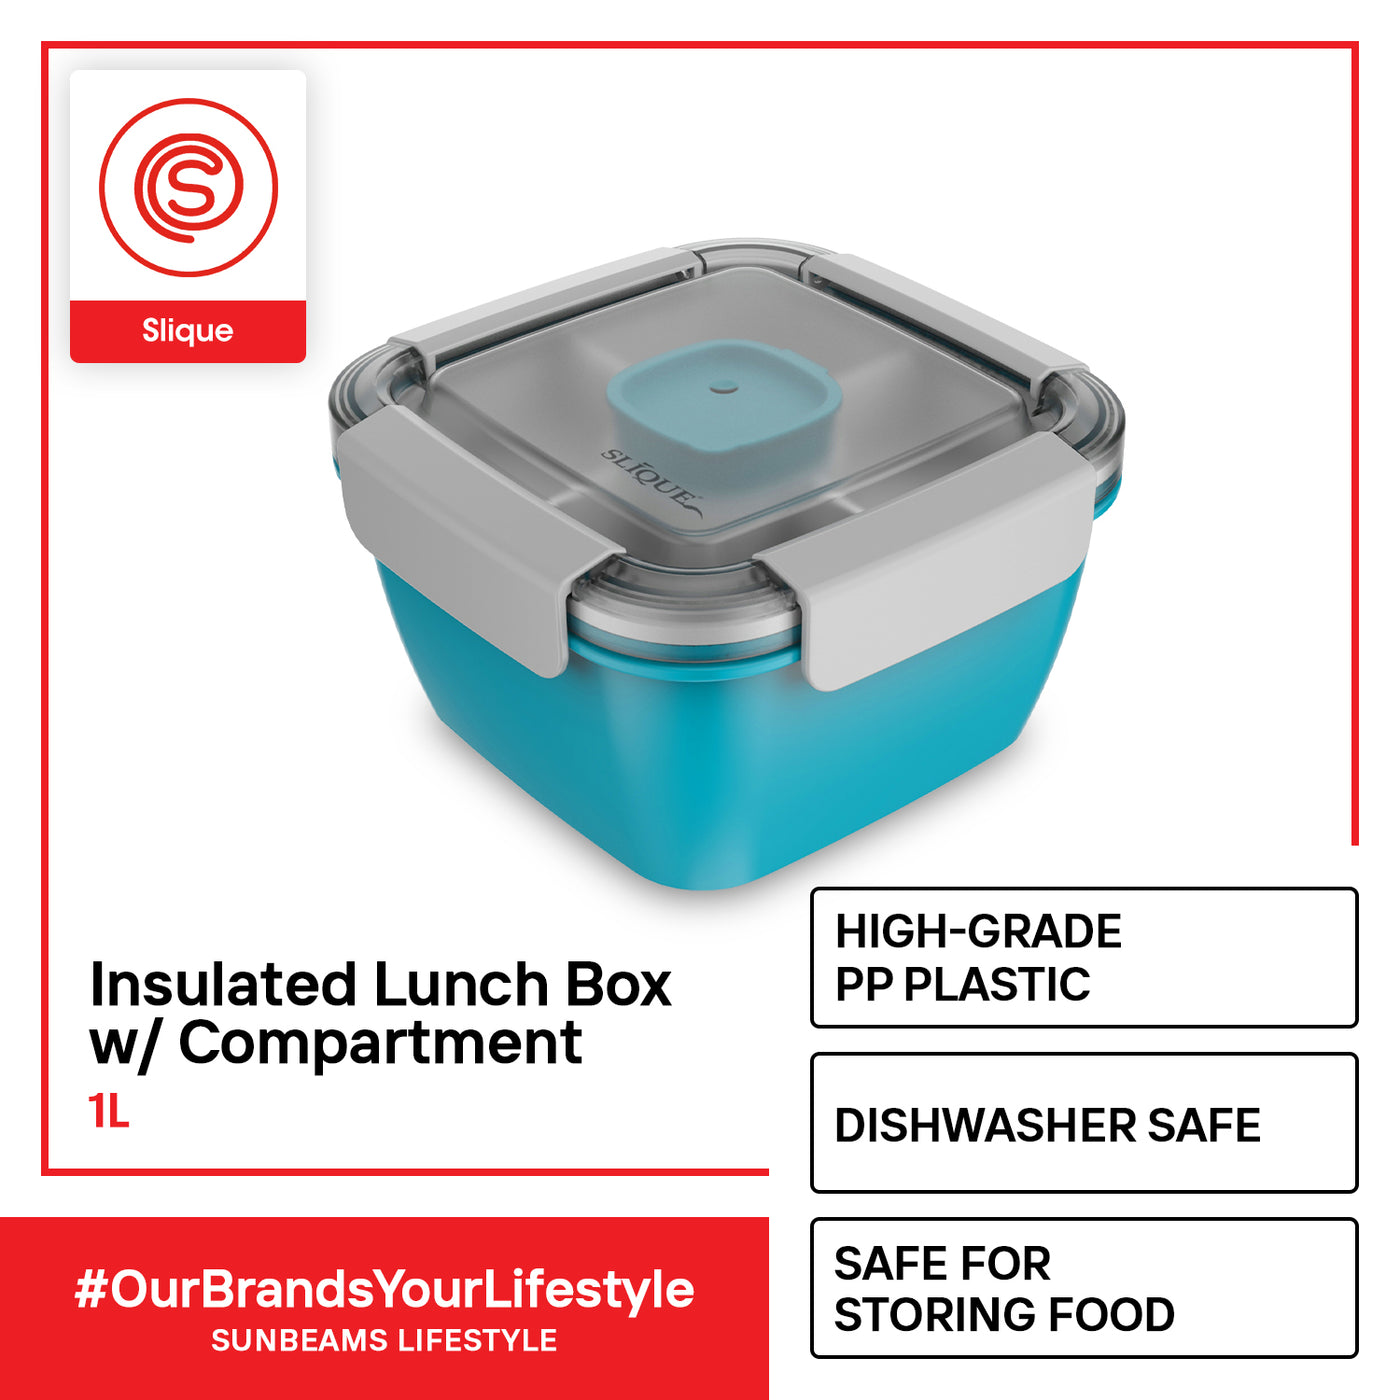 SLIQUE Premium Lunch Box w/ Compartments 1000ml1L BPA Free Airtight Microwave Safe Amazing Gift Idea For Any Occasion! (Aqua Green)